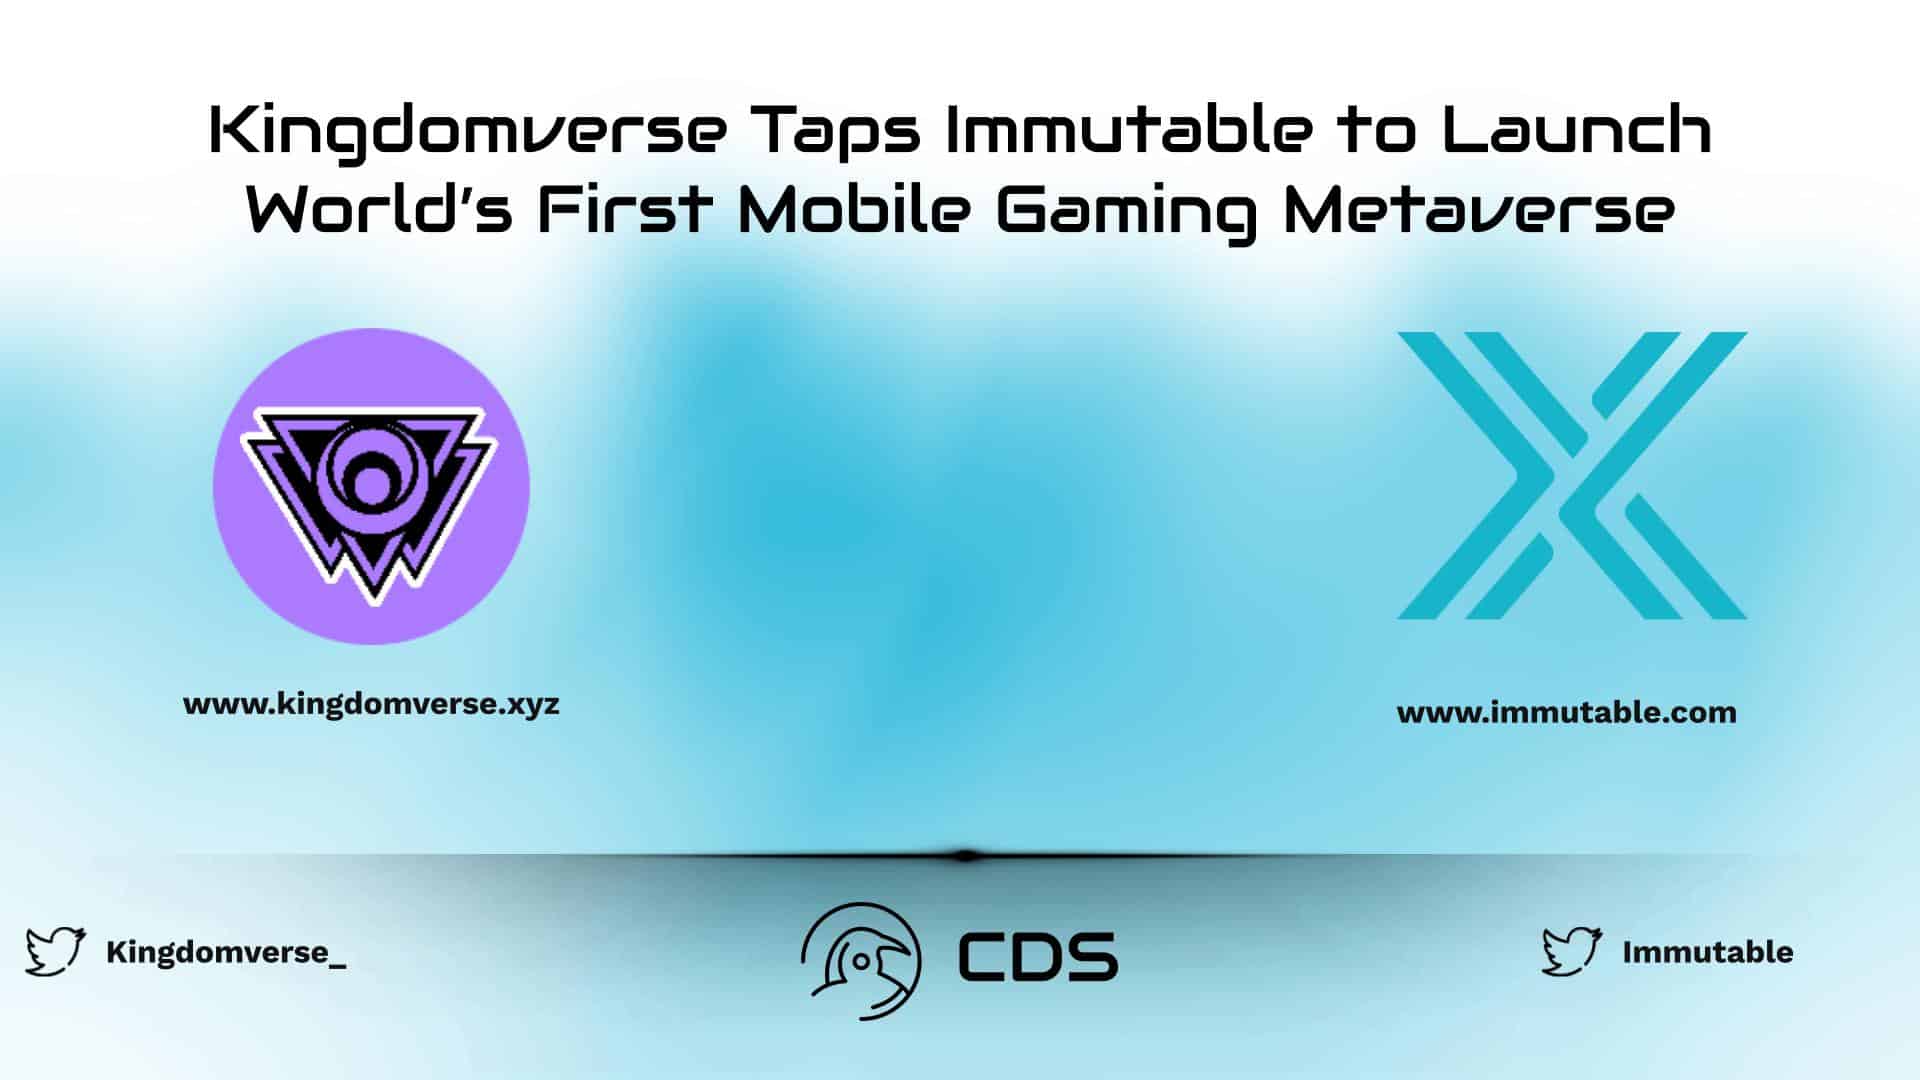 Kingdomverse Taps Immutable to Launch World’s First Mobile Gaming Metaverse